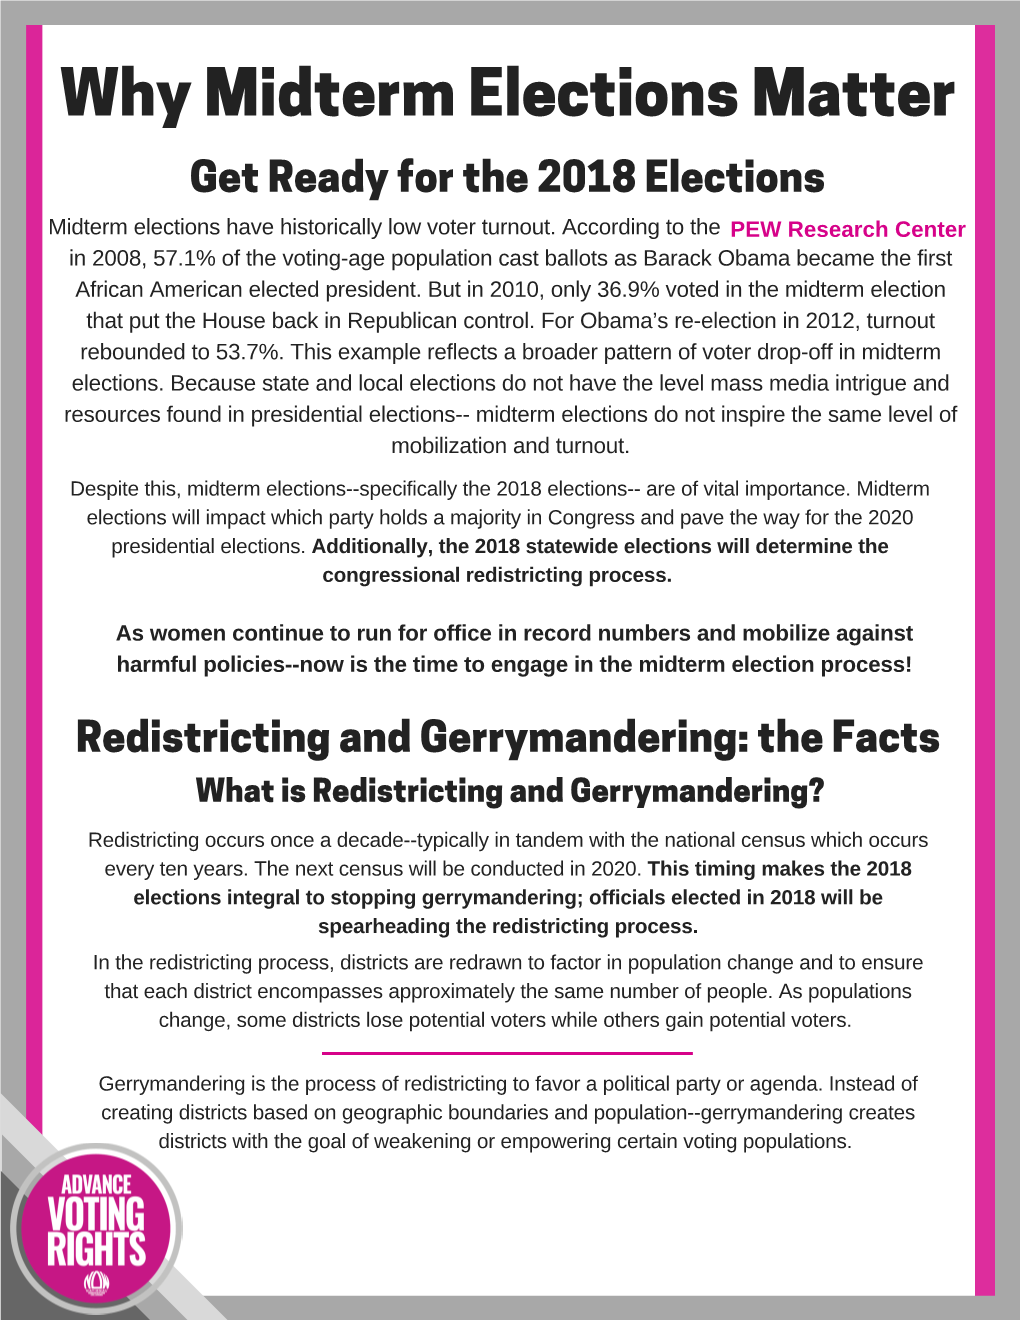 Why Midterm Elections Matter Get Ready for Th E 2018 Elections Midterm Elections Have Historically Low Voter Turnout